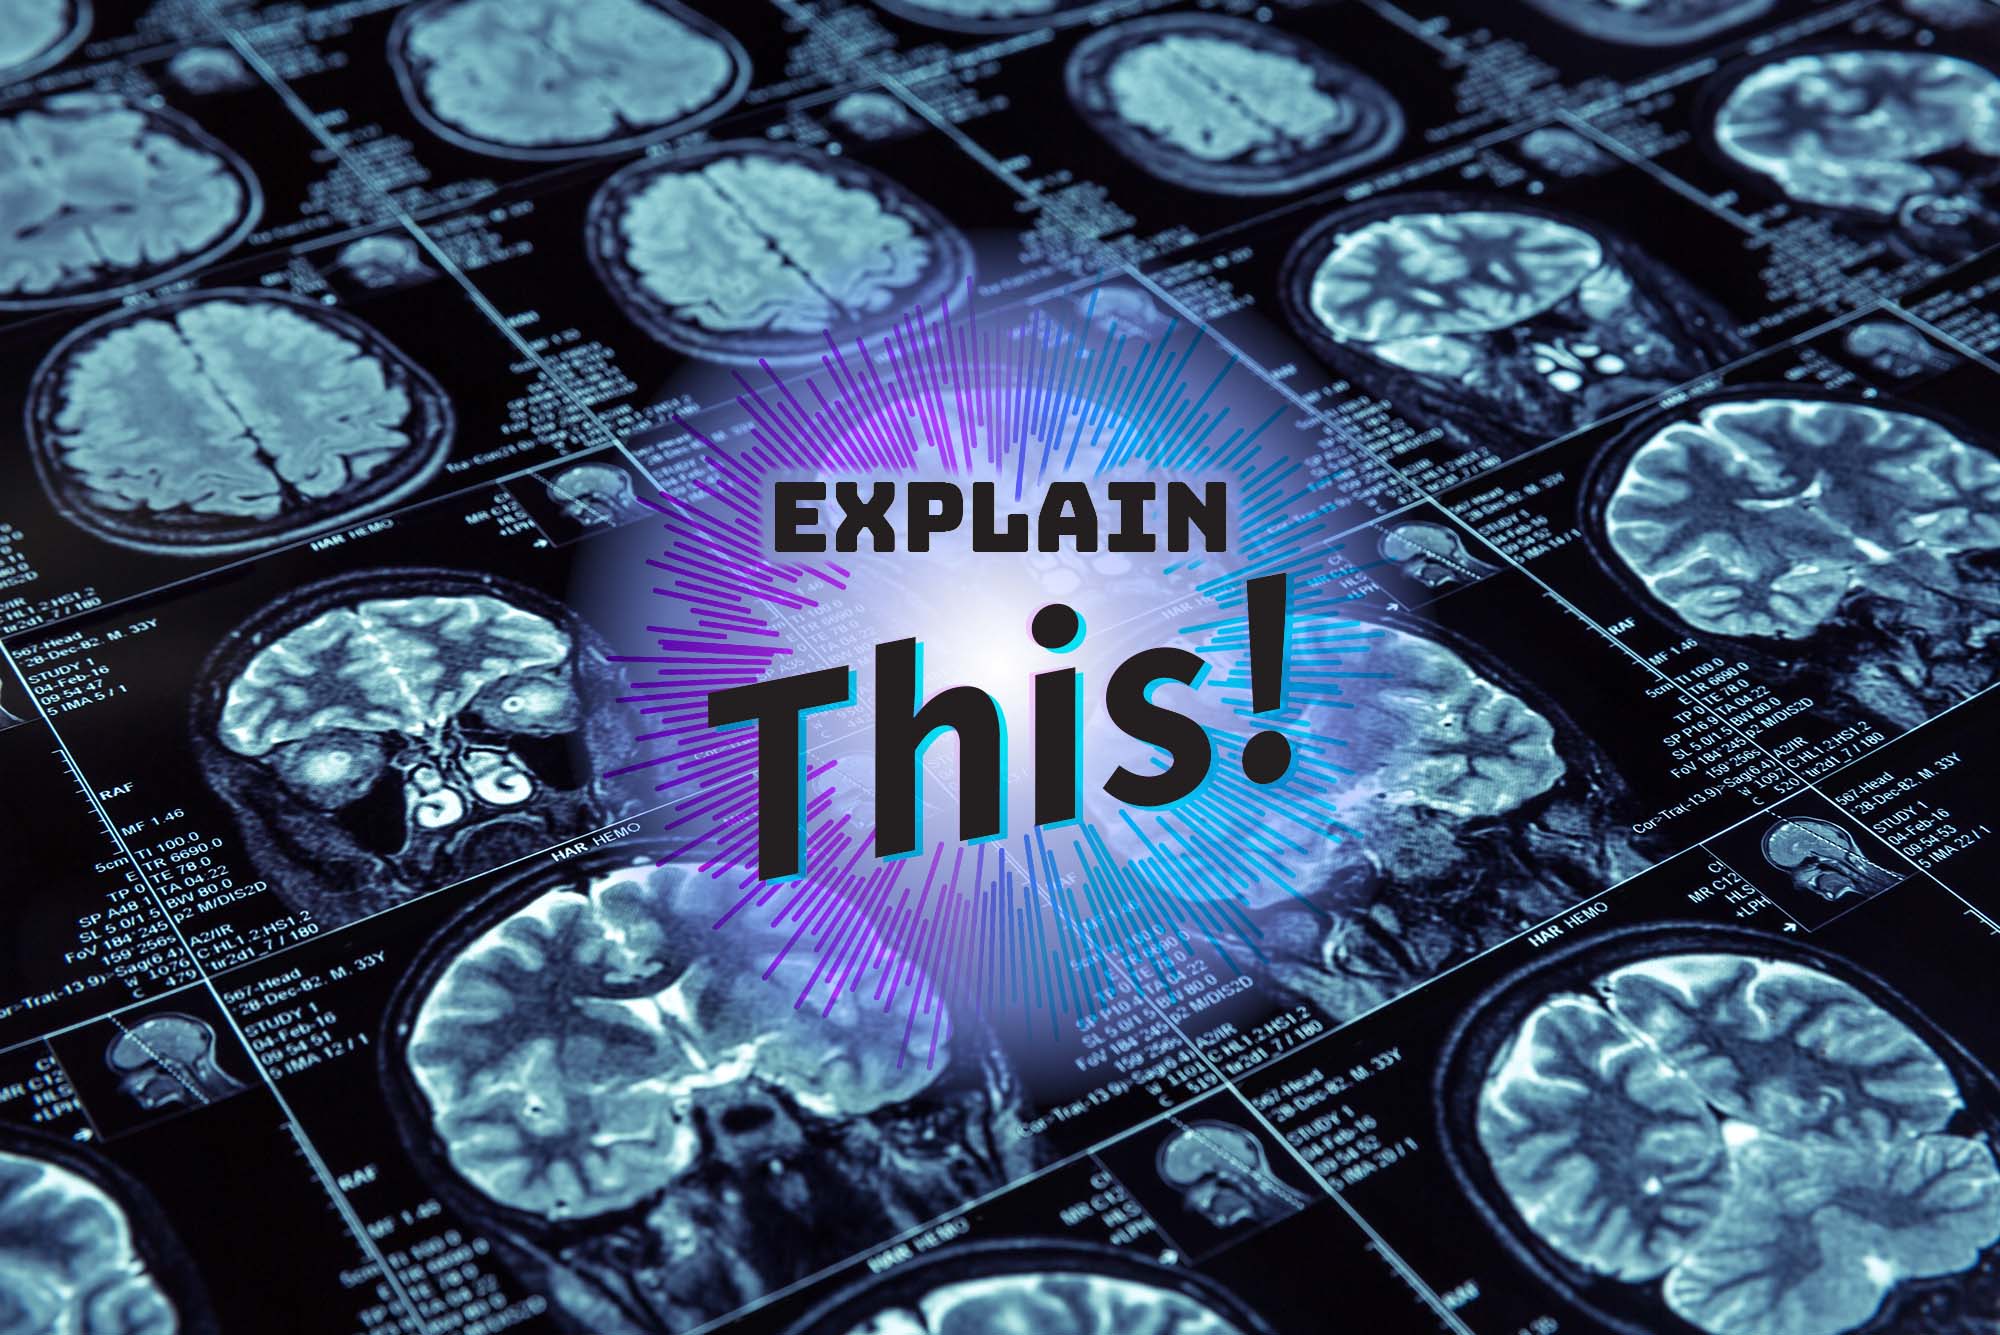 Photo: An array of brain scans with a text overlay reading "Explain This!"